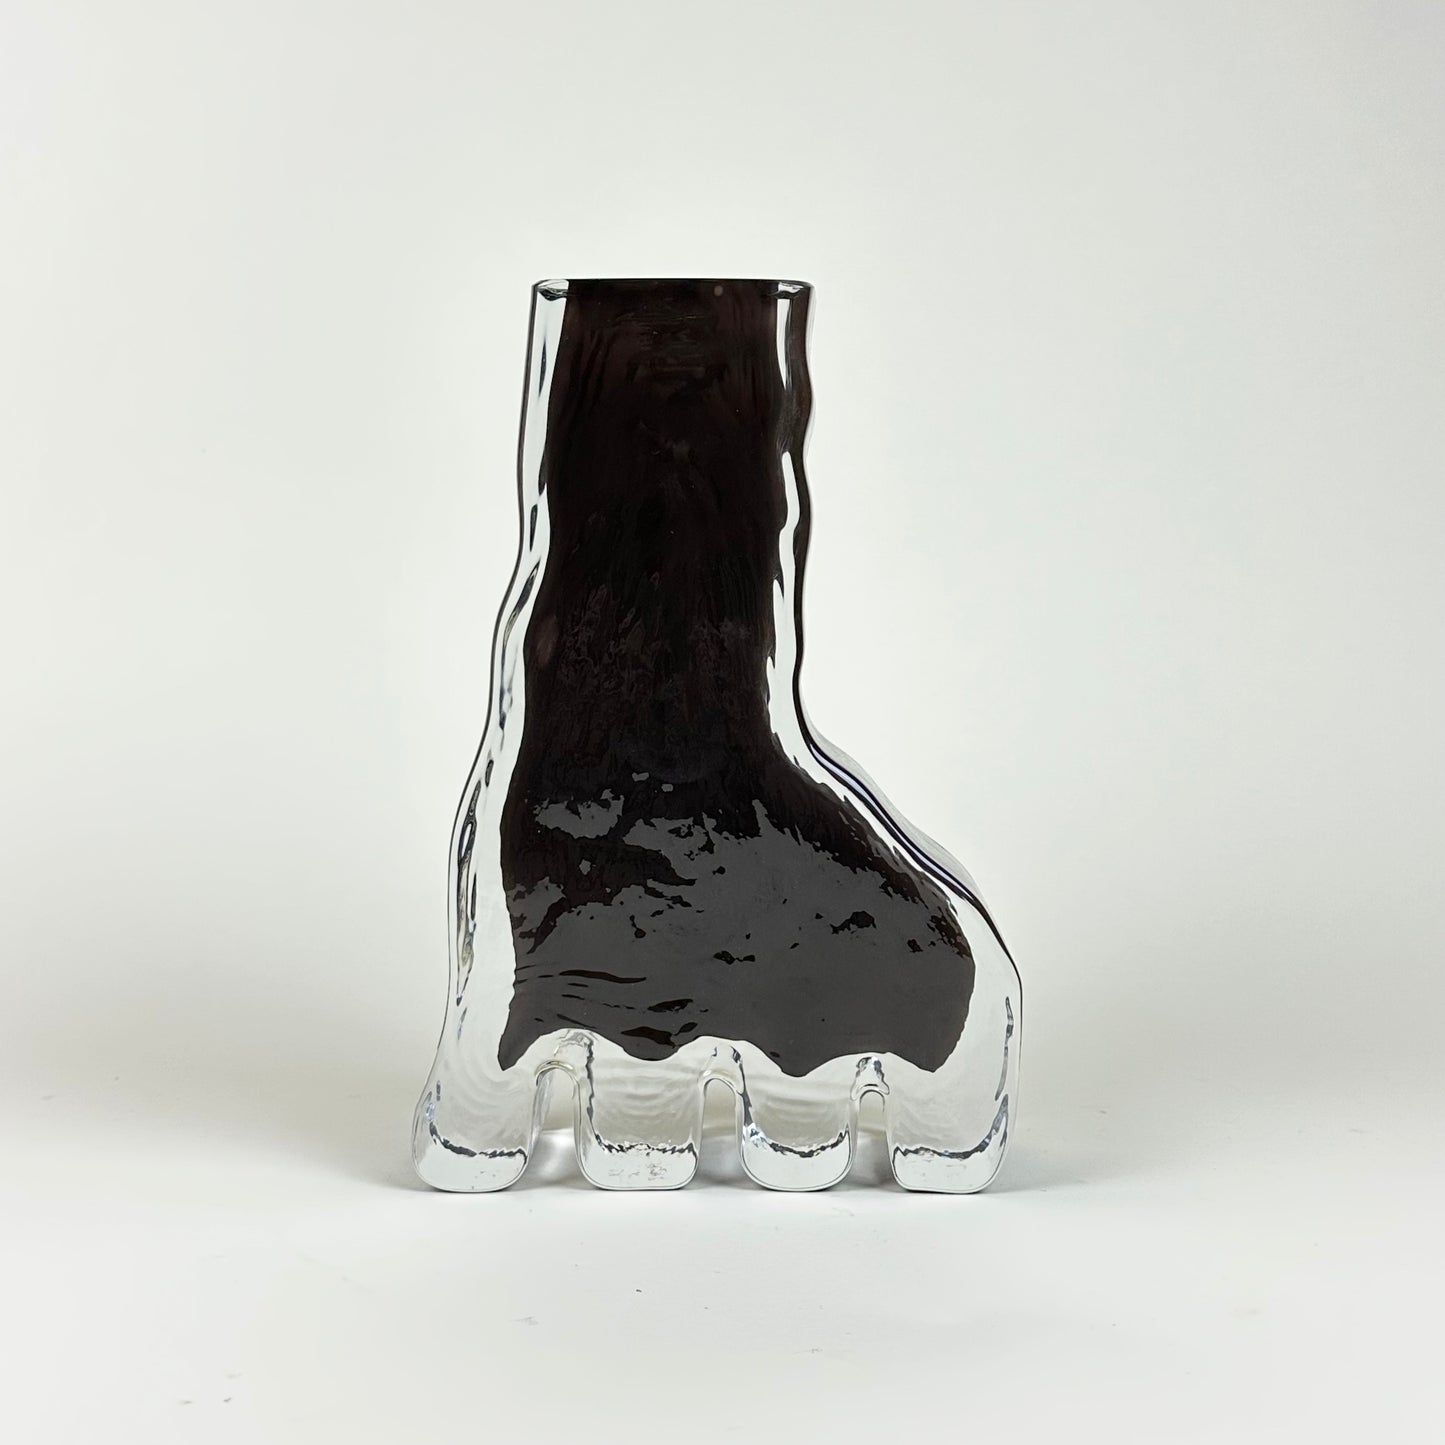 Studio Reiser "Paw" vase black, limited edition for Arranging Things